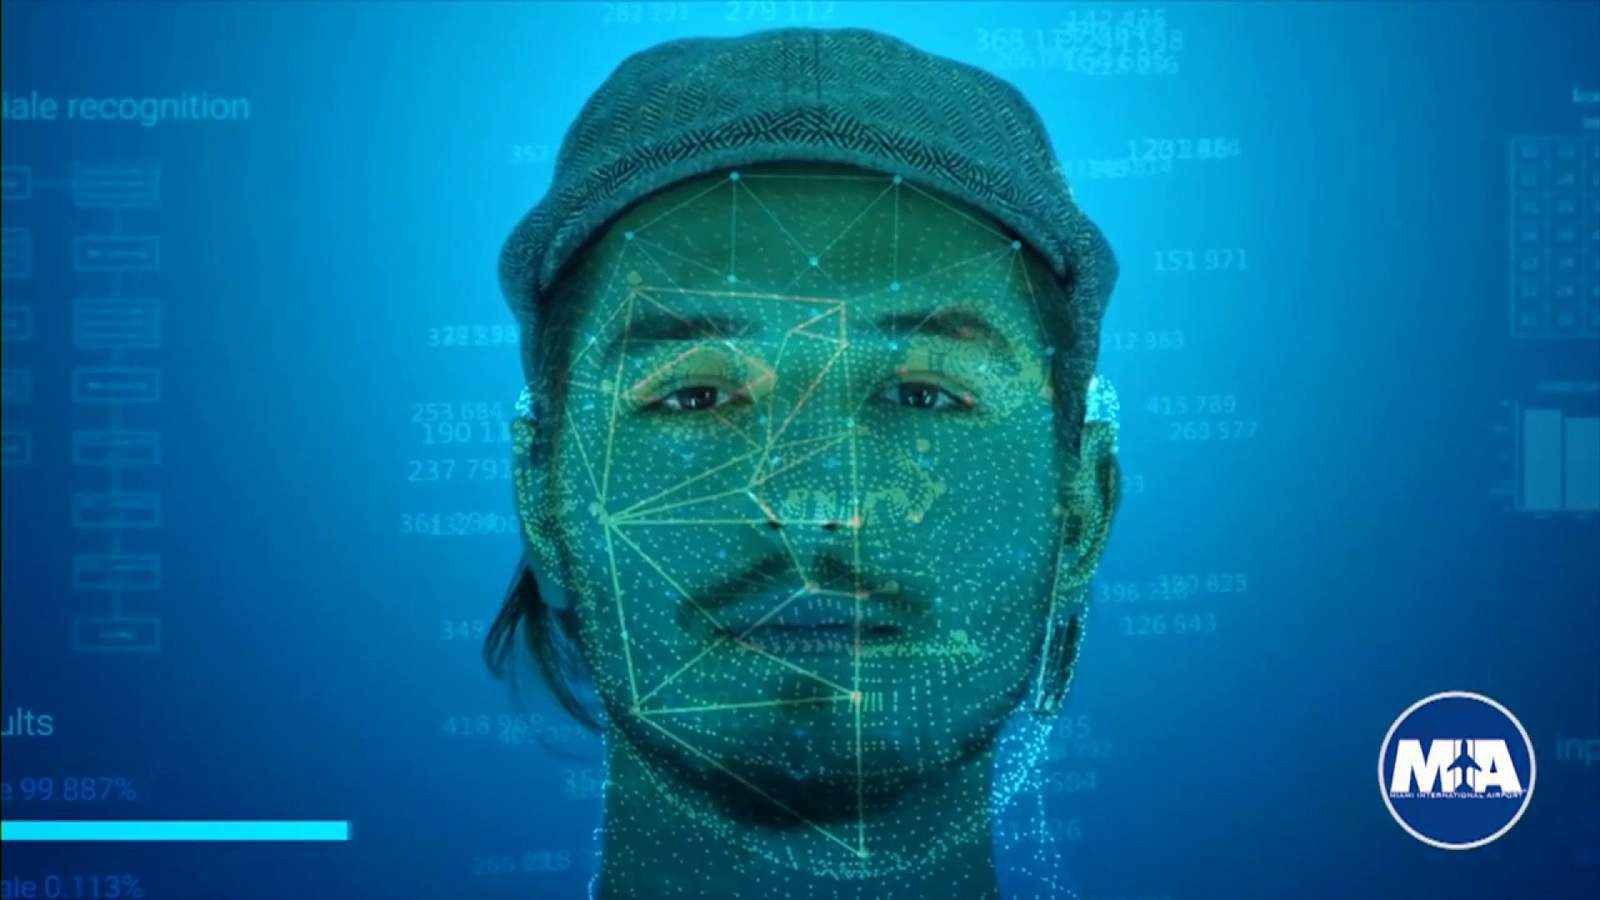 Foreign travelers at Miami International Airport will be included in federal facial biometric database